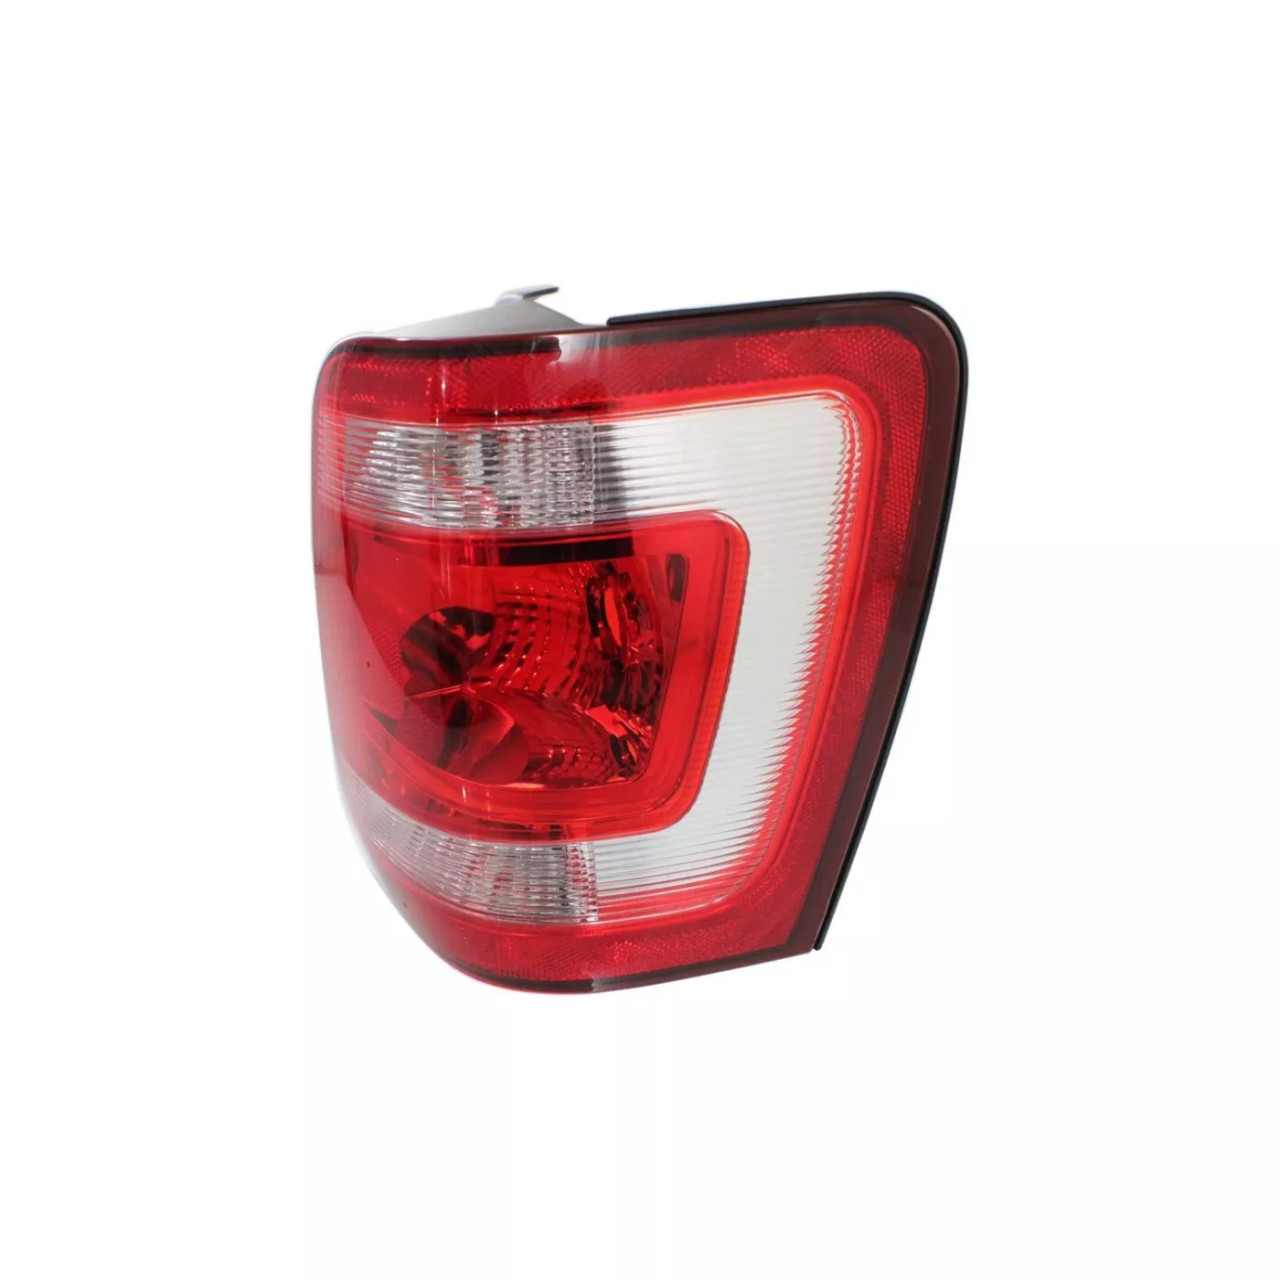 2Pc Tail Light Set For 2008-2012 Ford Escape Left and Right Tail Lamps